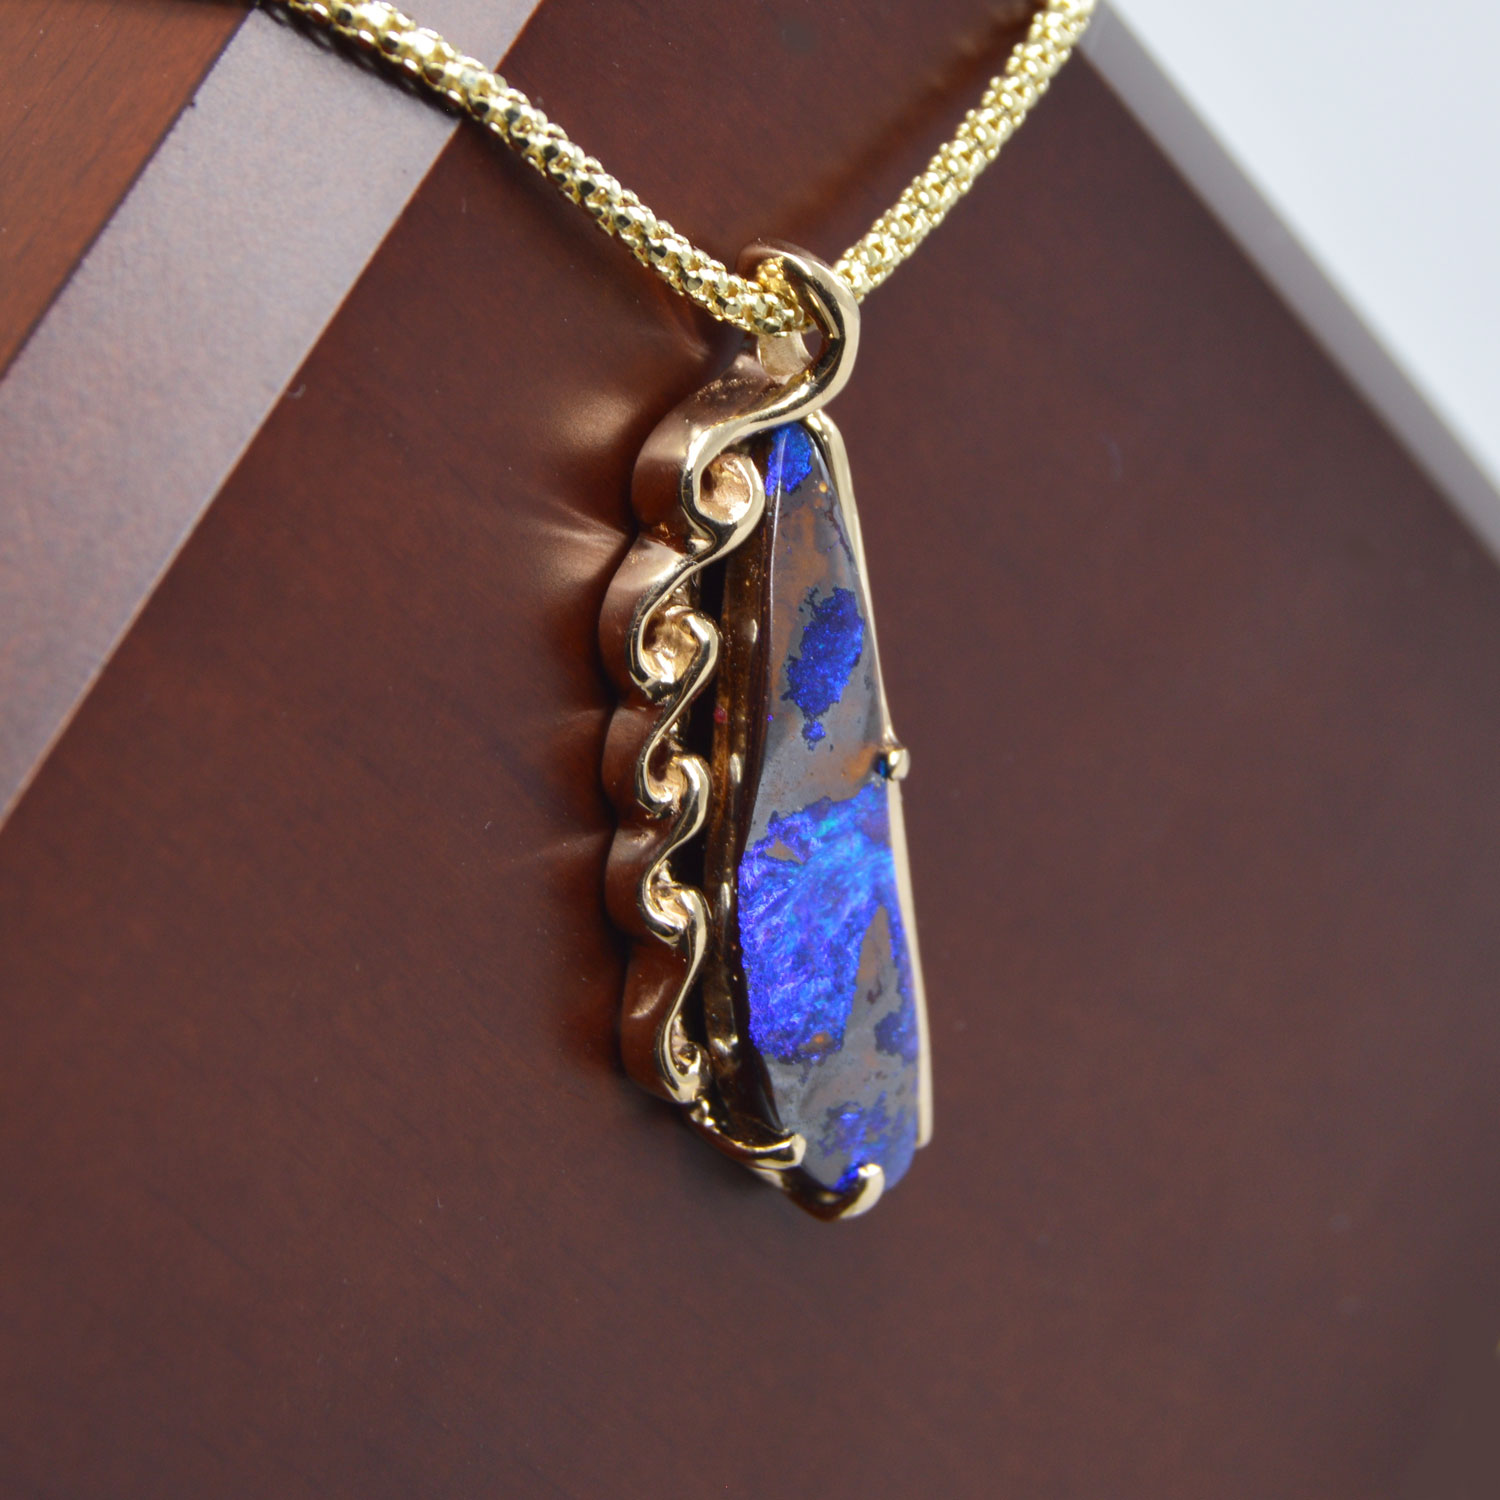 Australian boulder opal pendant custom jewelry with blue and brown gemstone and 14K yellow gold carved pendant made by Morgan's Treasure